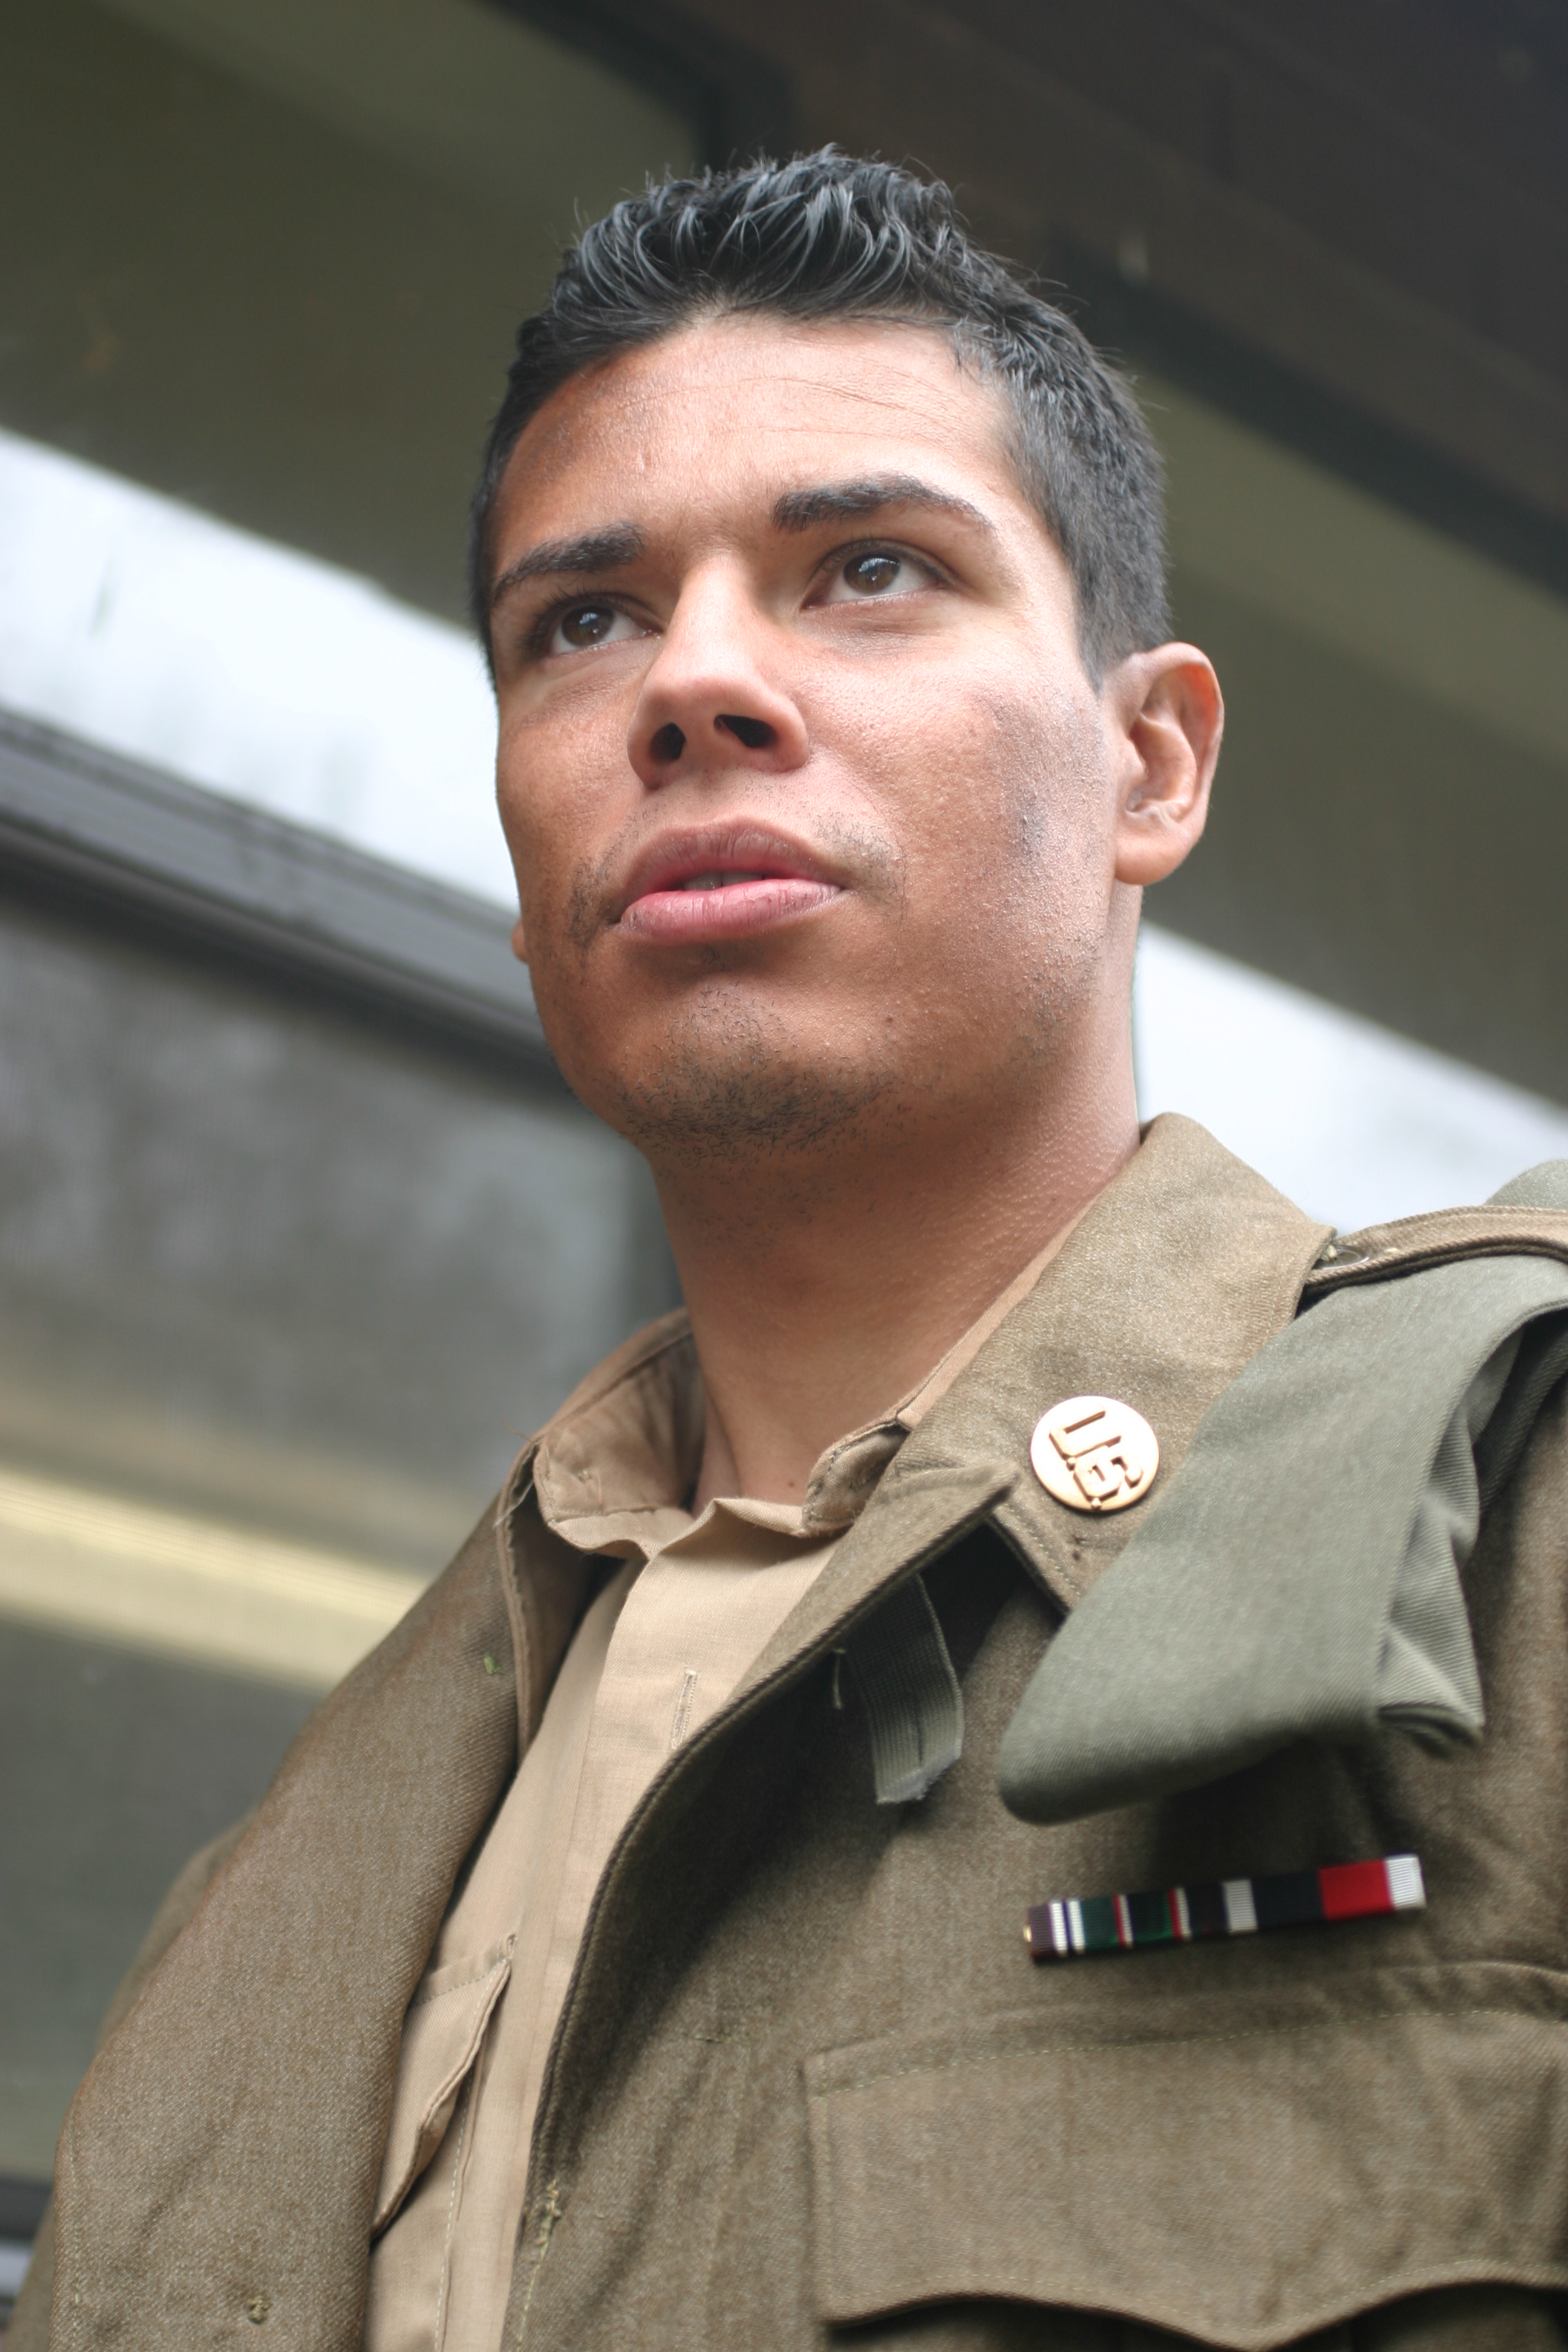 cesar aguirre as Cpl. Mitchell